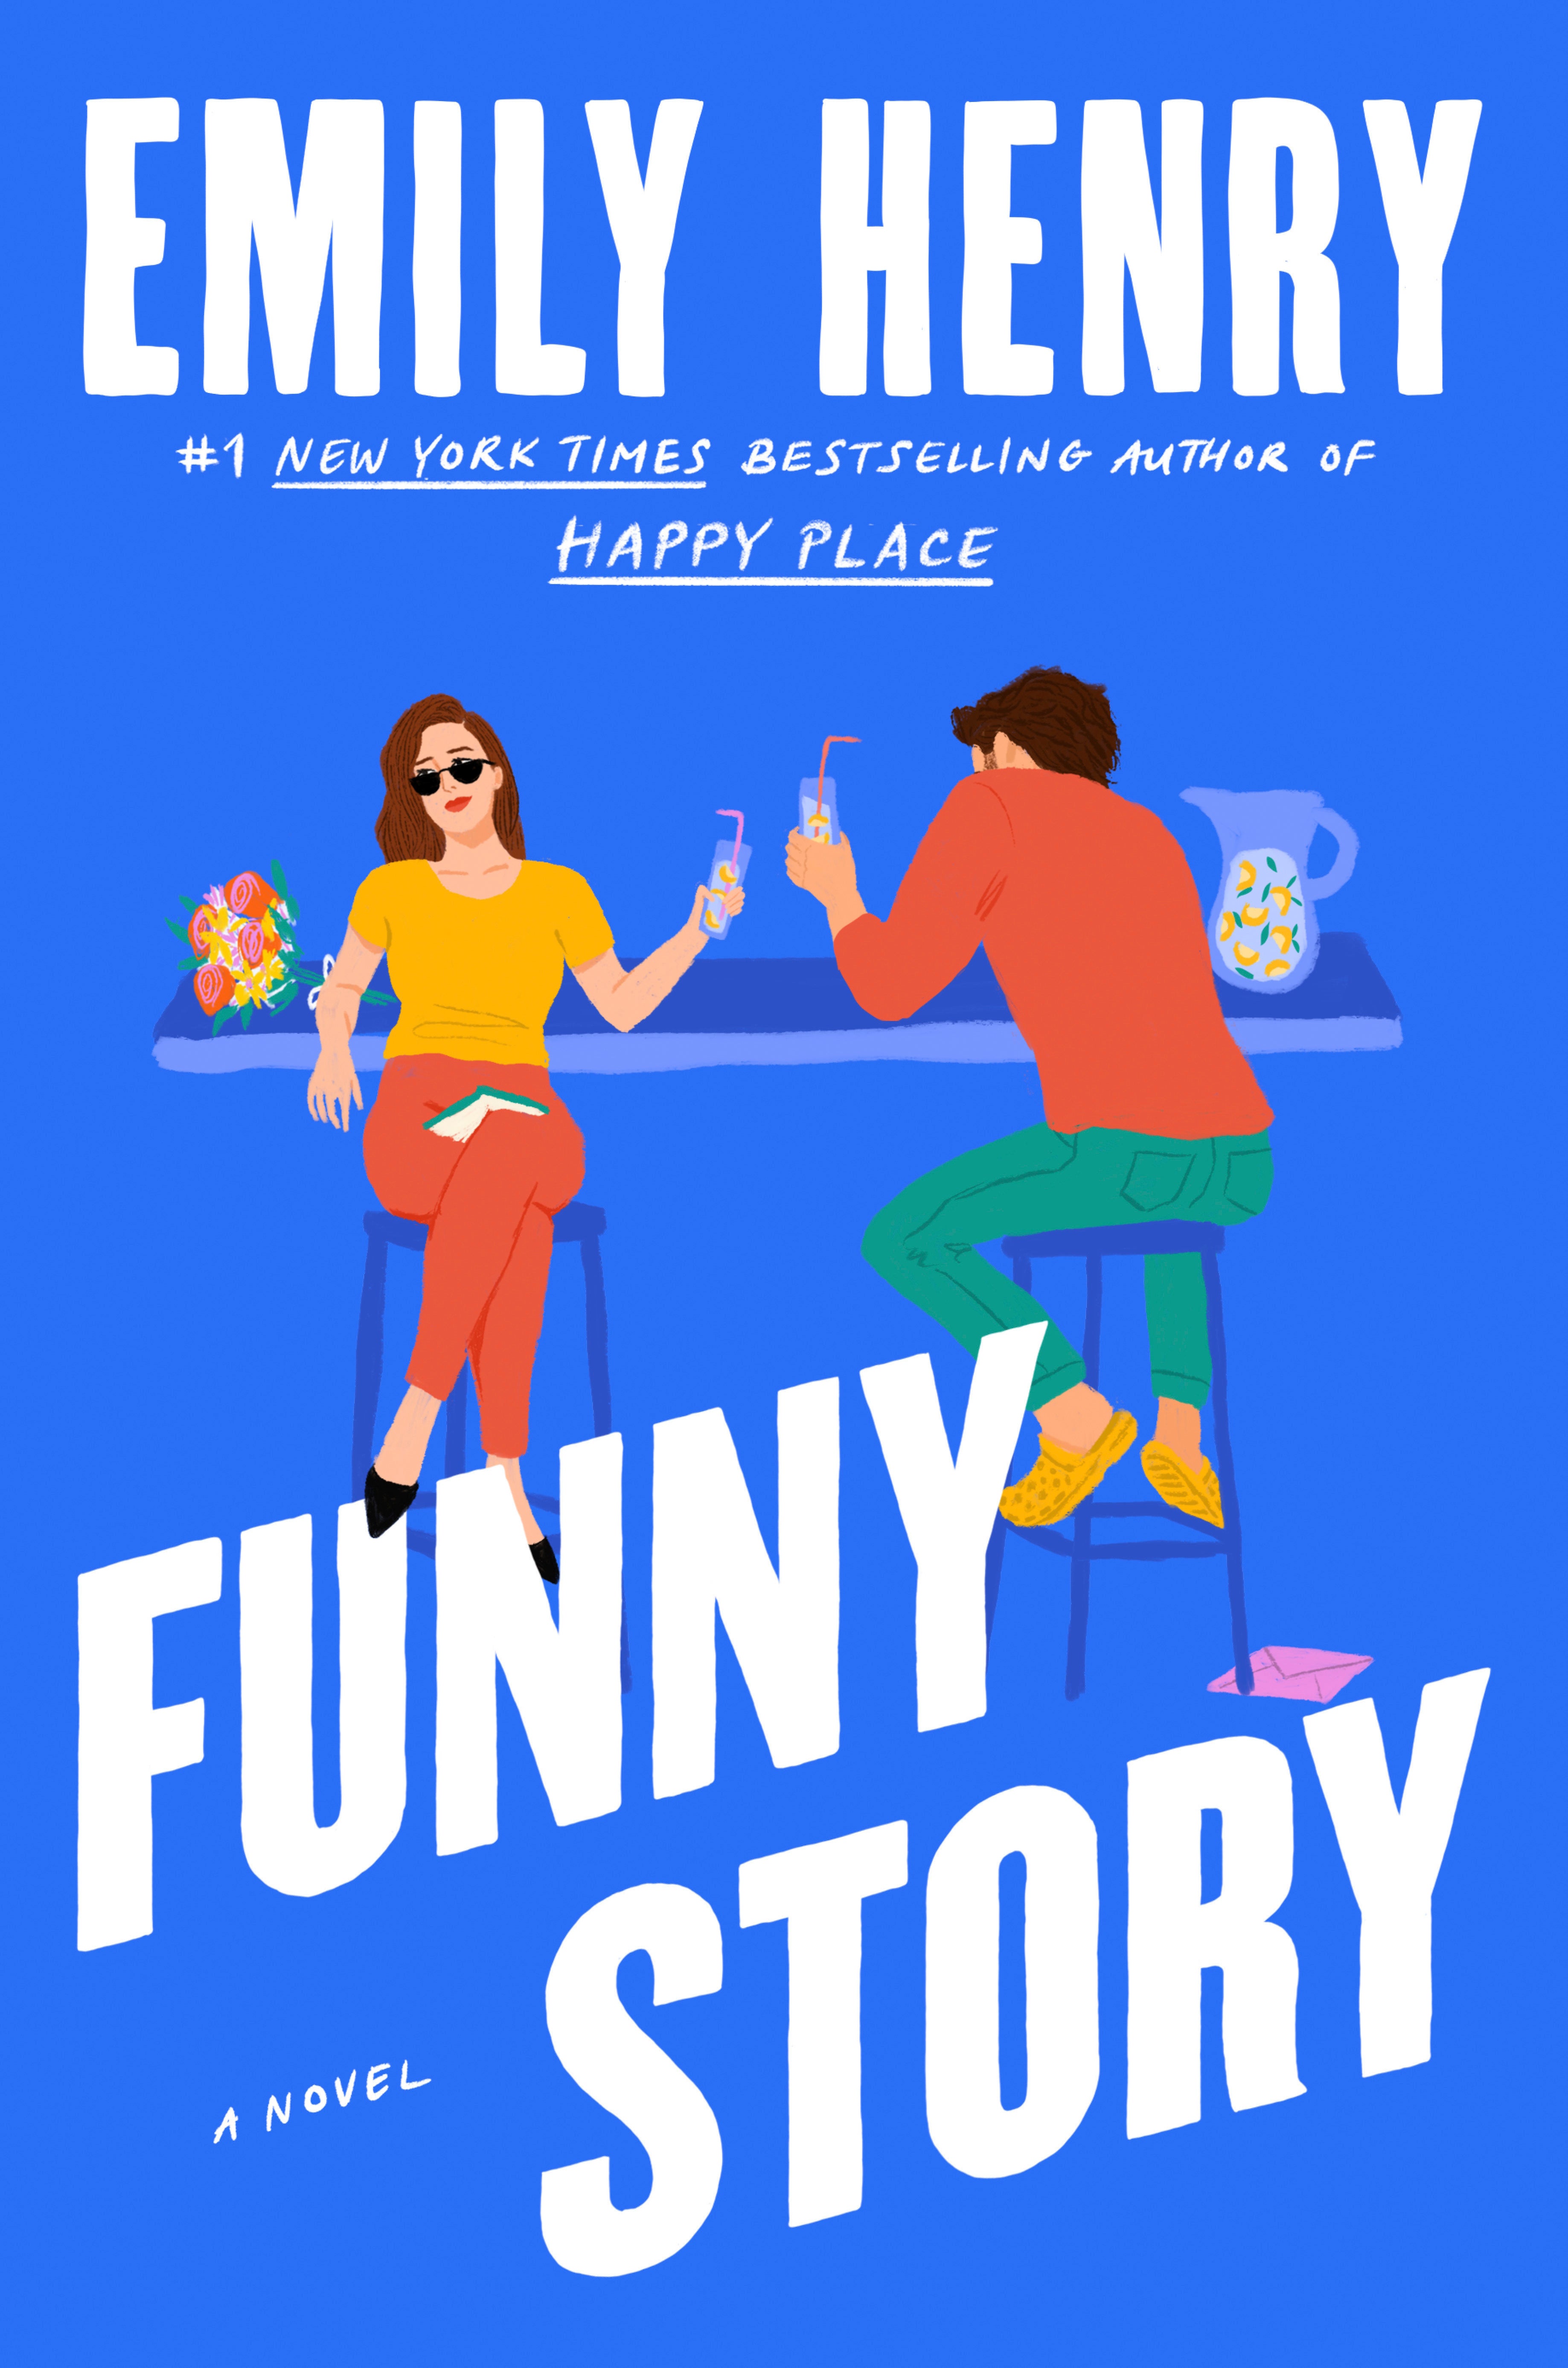 Book Review - Funny Story